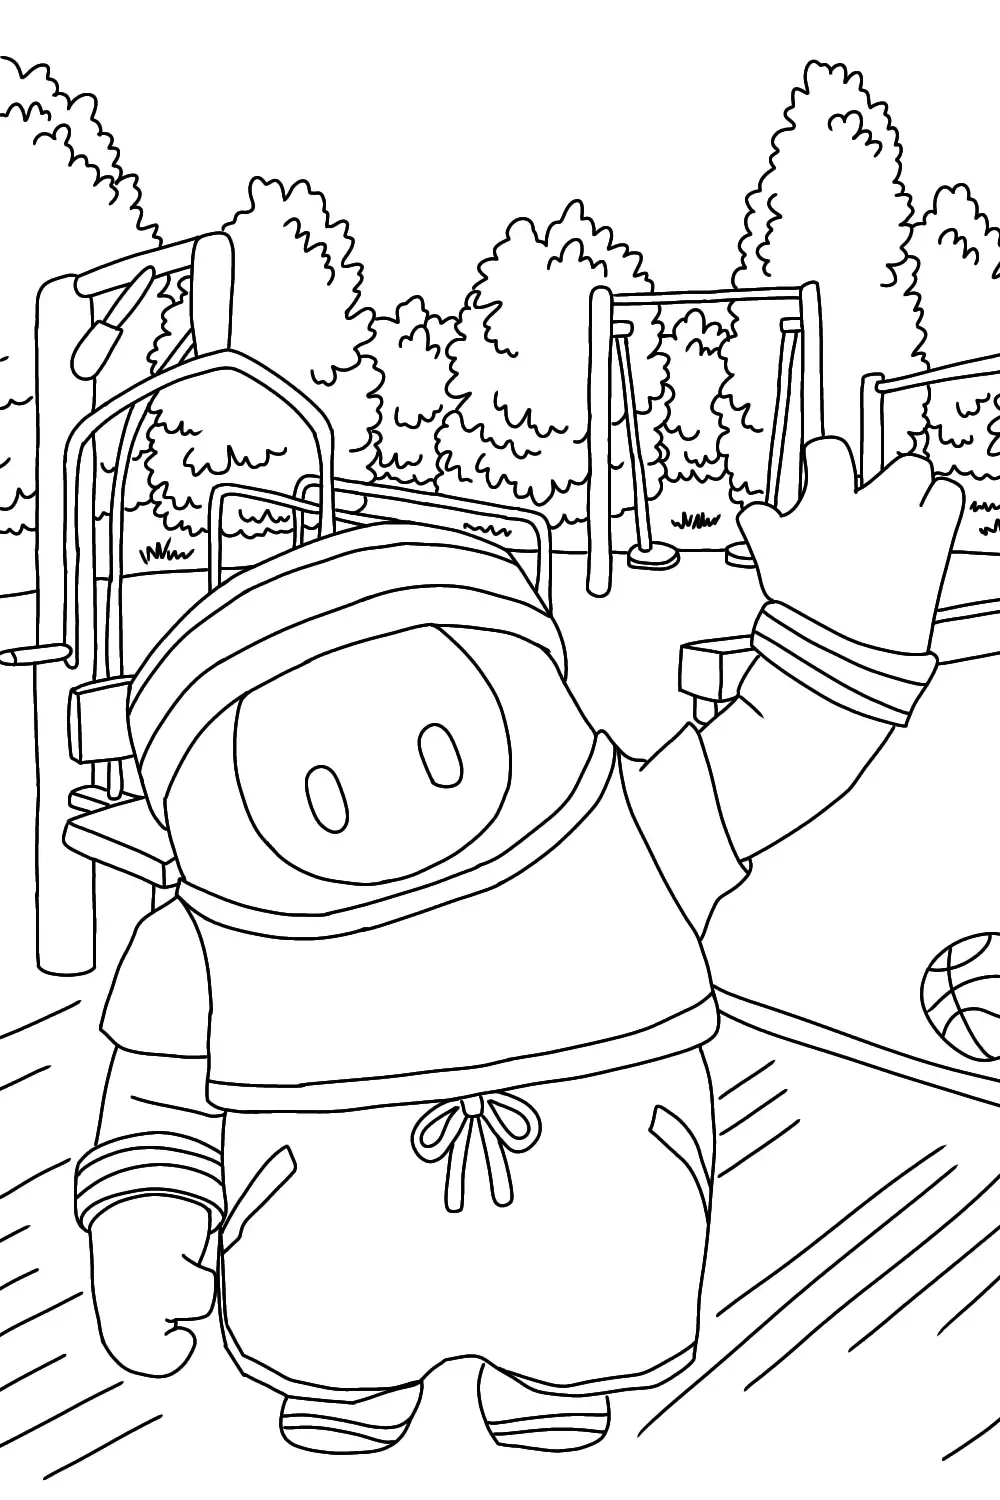 Fall Guys Character Coloring Pages